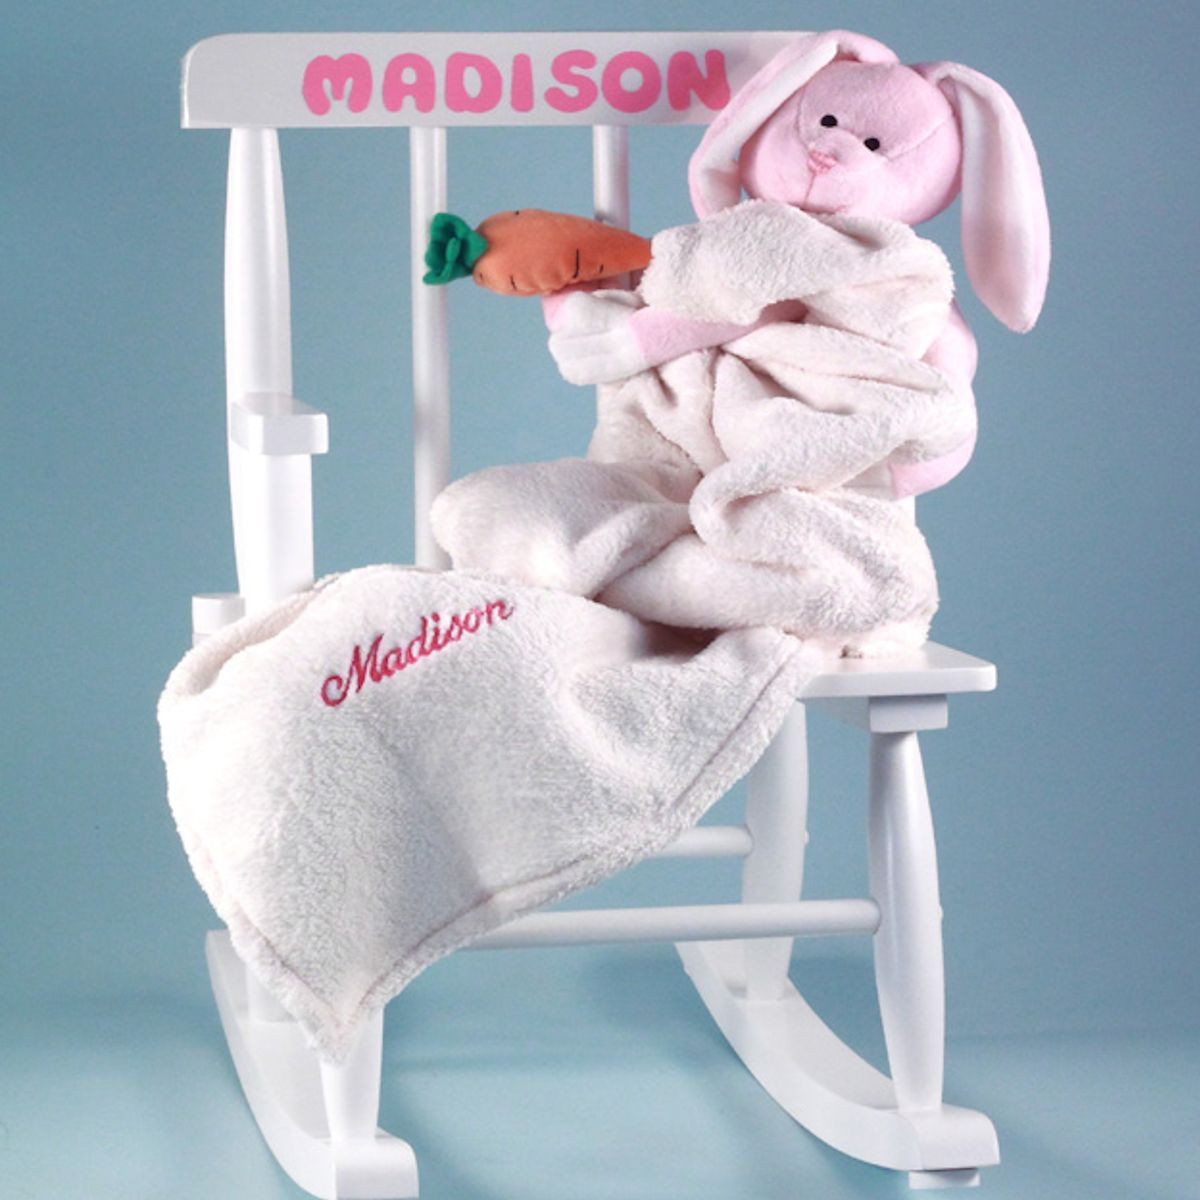 Personalized Baby Gifts For Girls
 Personalized Rocking Chair Baby Gift Set Girls